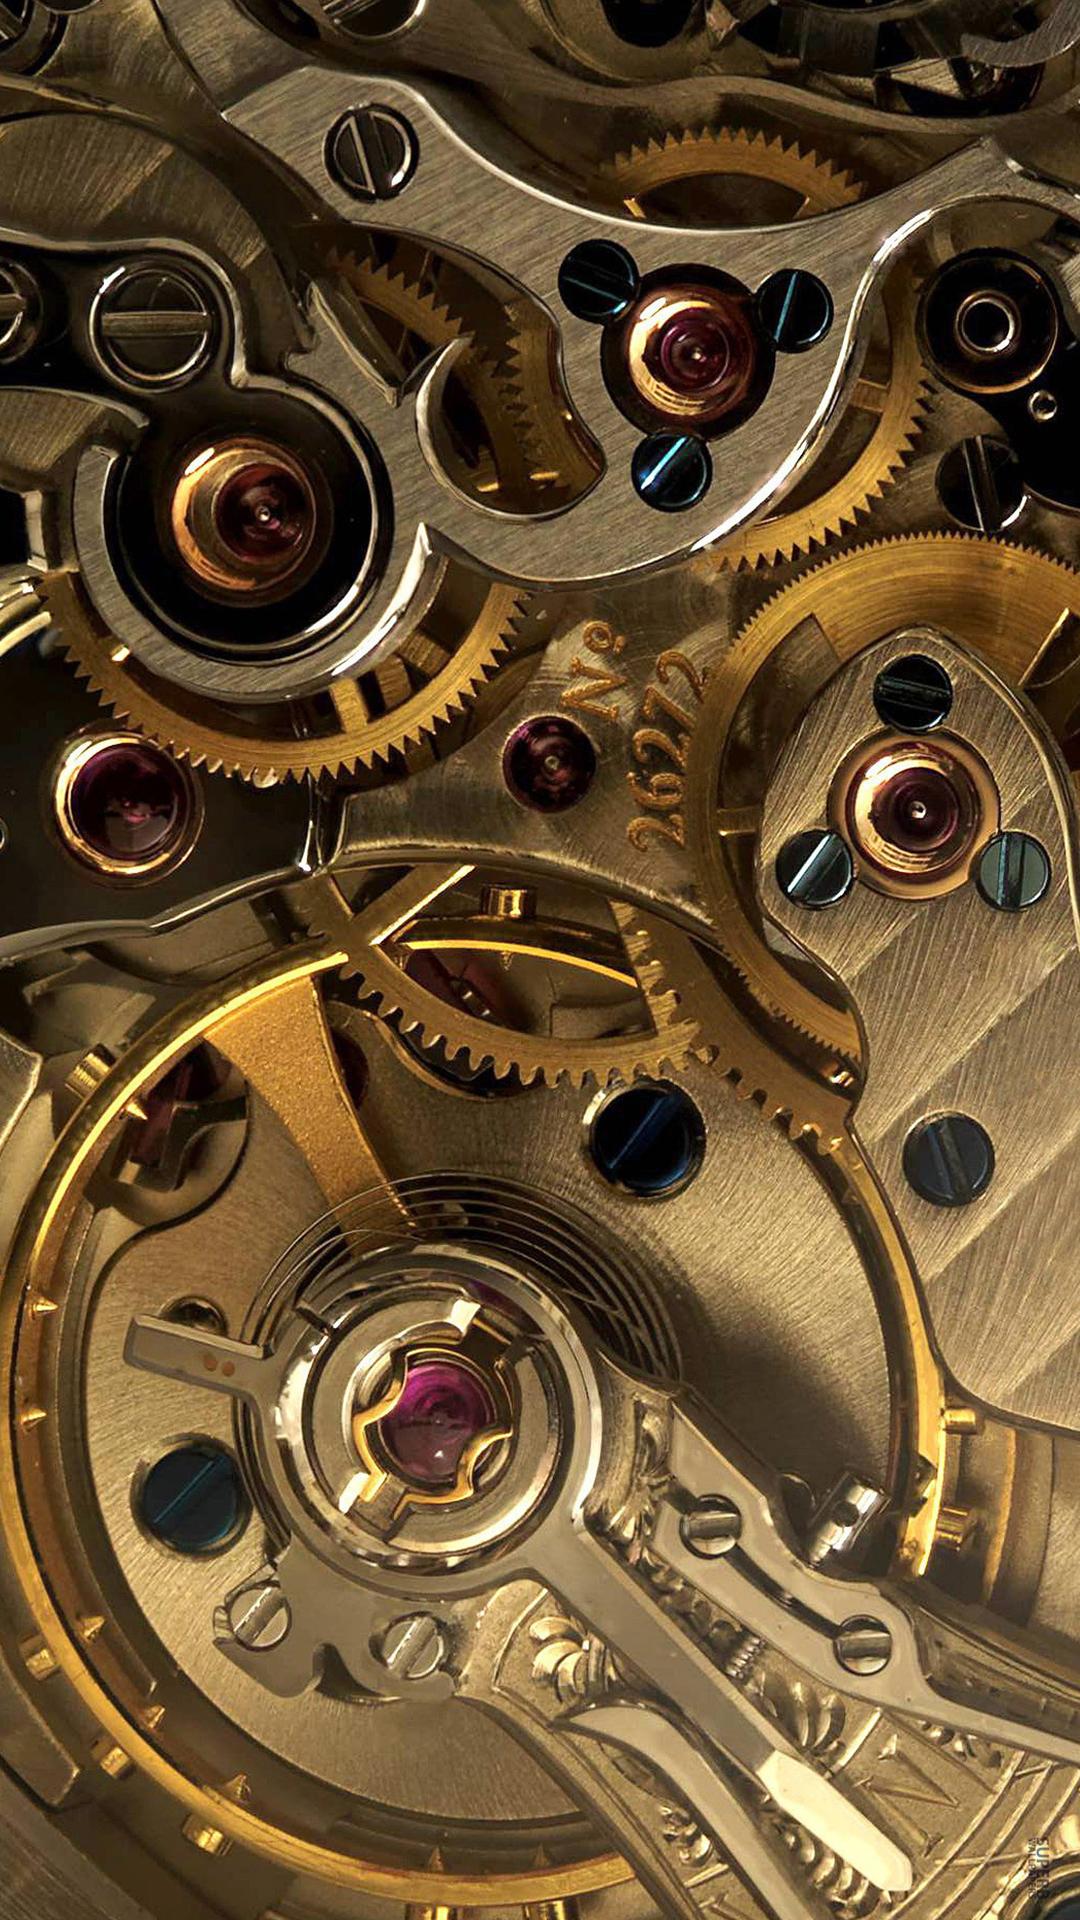 Mechanical Gear APUS Live Wallpaper for Android